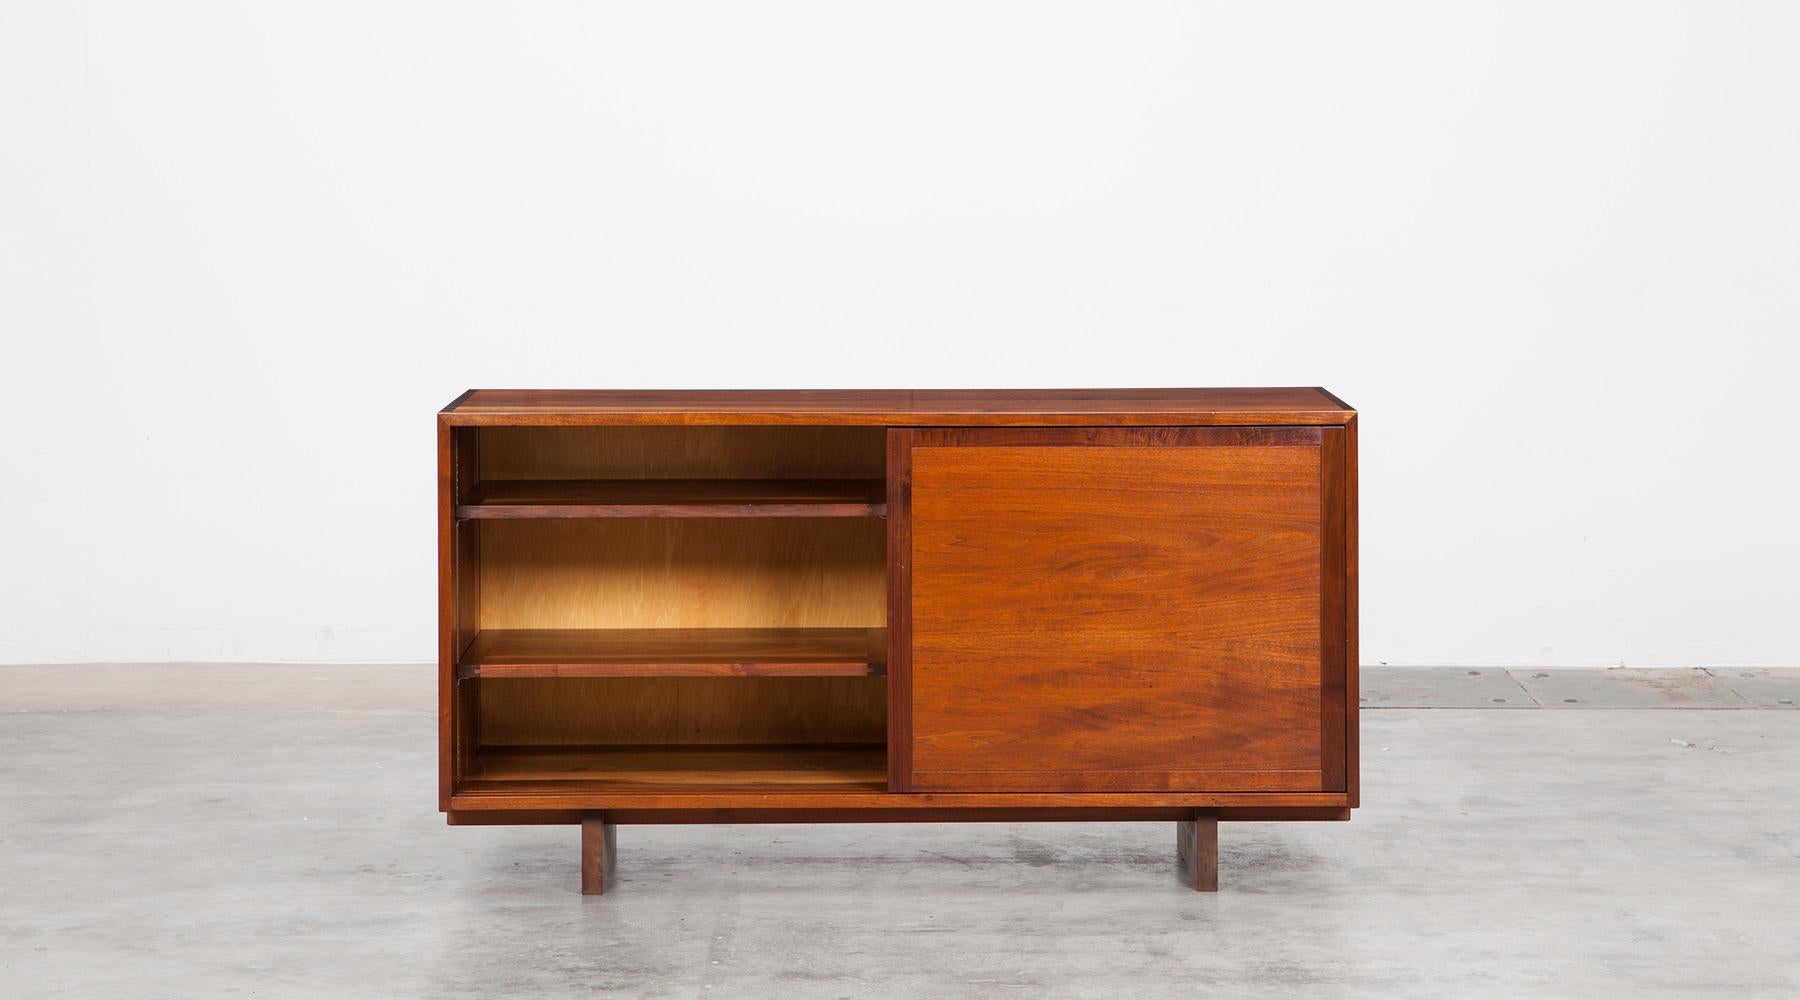 Handcraft sideboard in walnut, George Nakashima, 1962, USA

This handcrafted sideboard by George Nakashima comes with two sliding doors which conceal four drawers on one side and two shelves on the other side. This pieces made out of walnut comes in